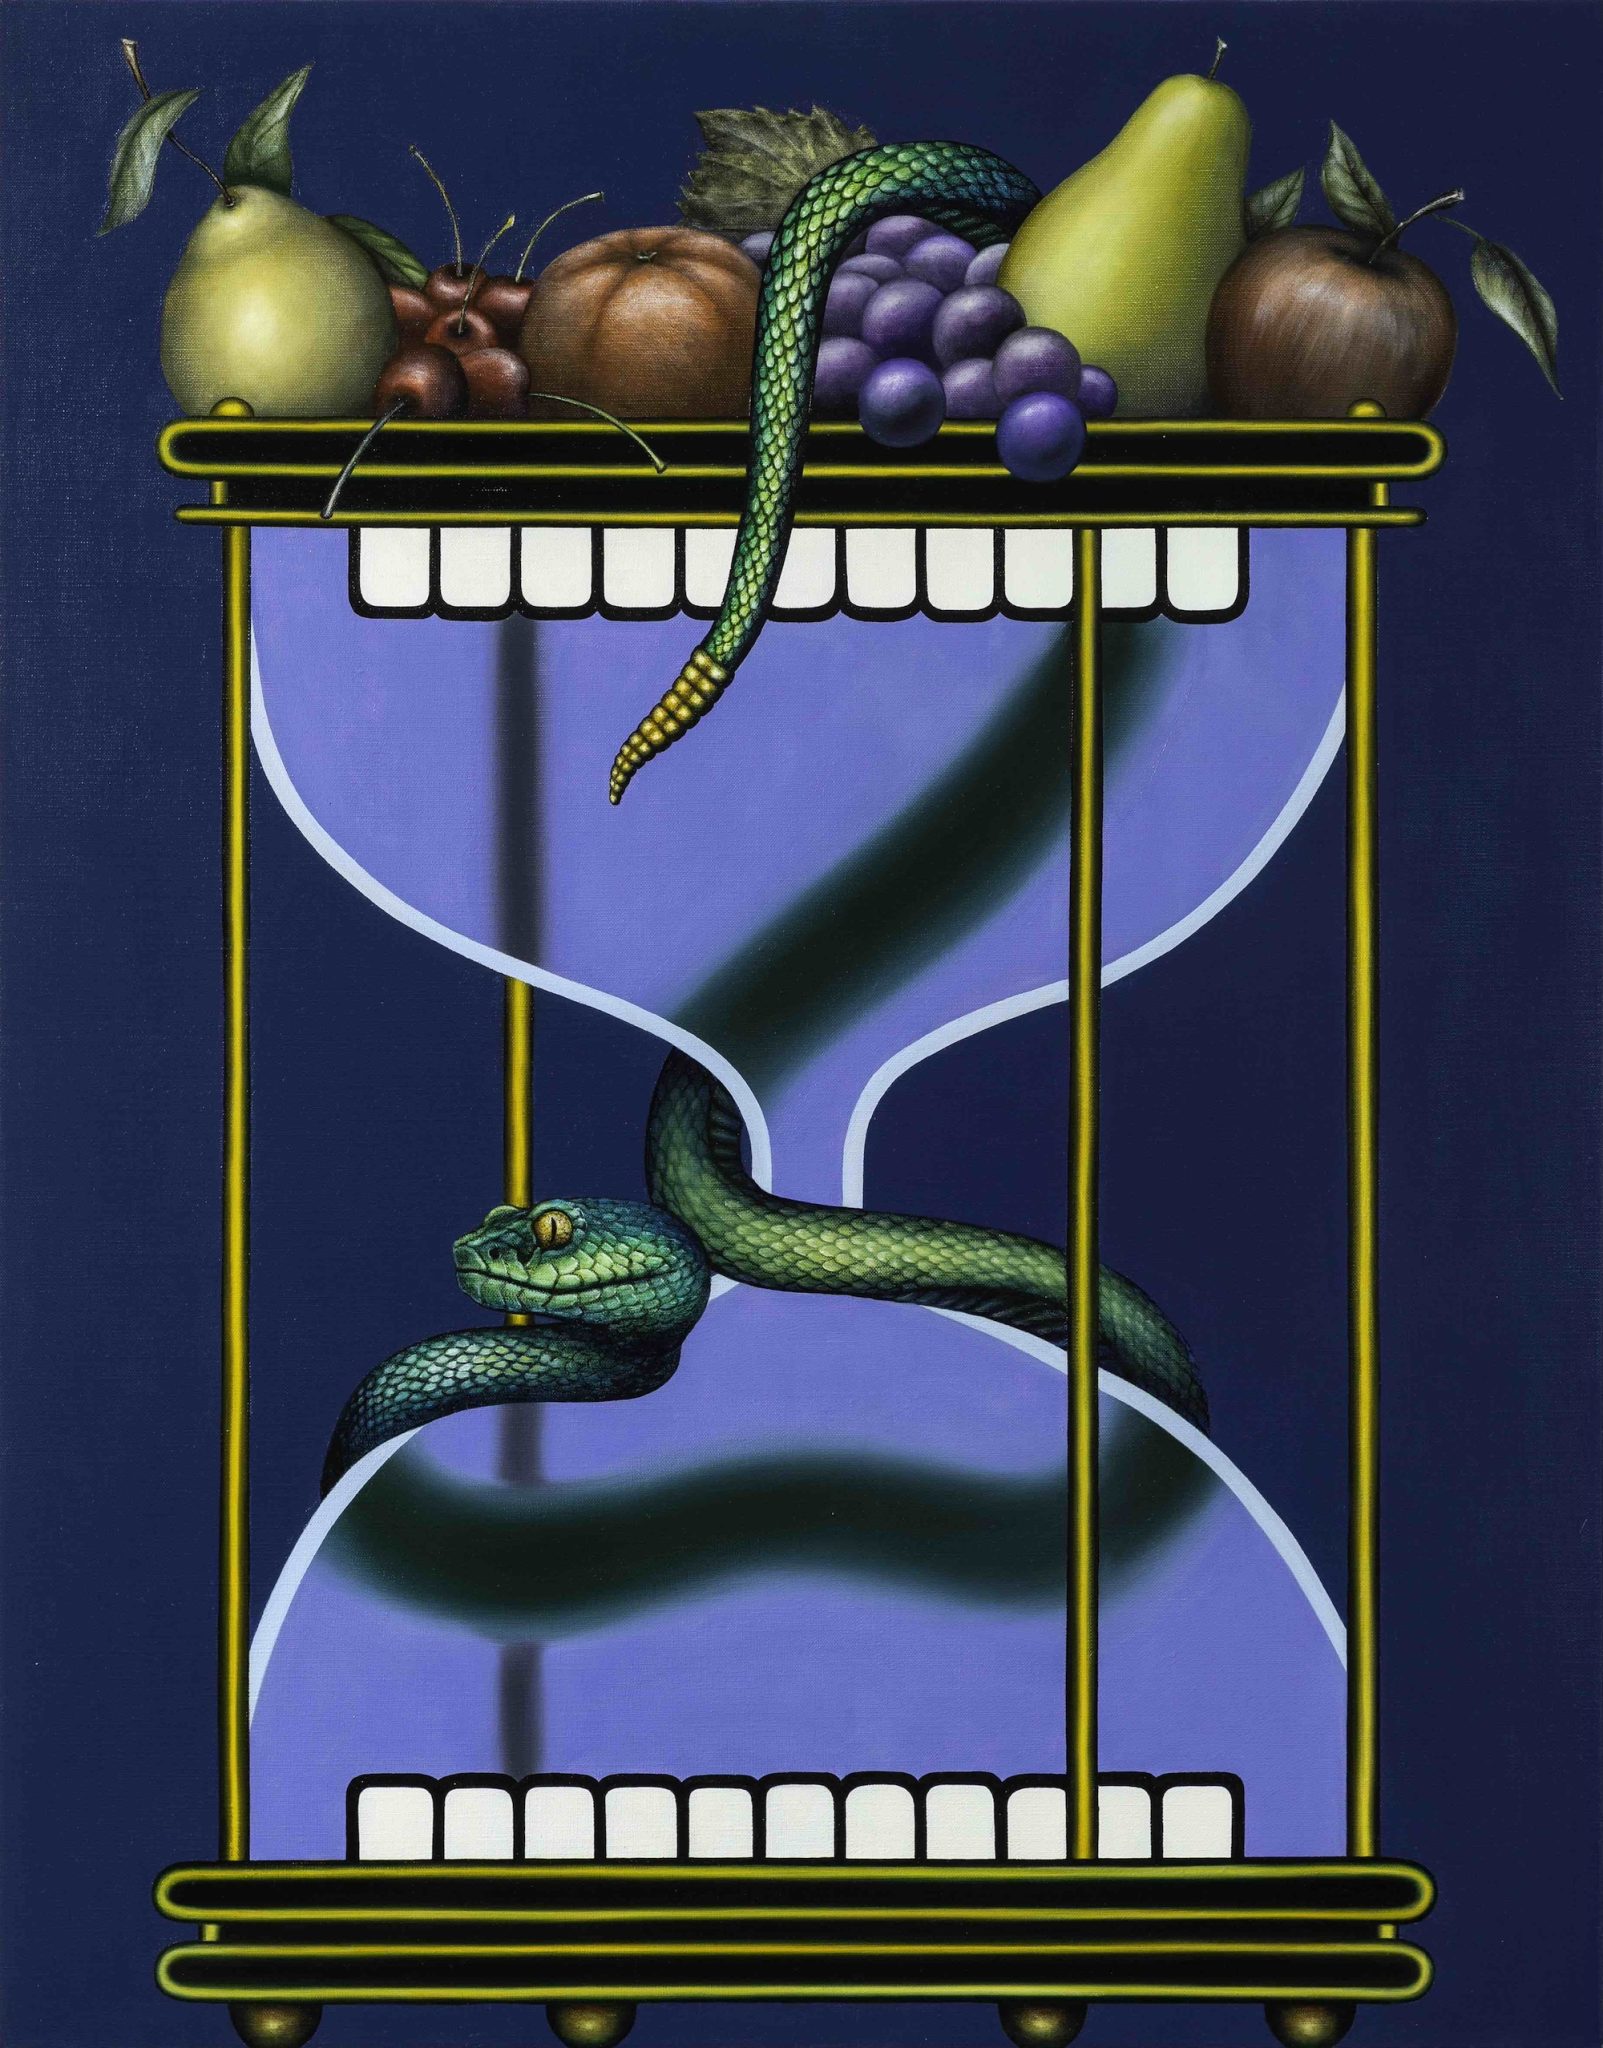 An artwork of an hourglass object with fruit spilling out at the top and a snake winding around the body of the hourglass